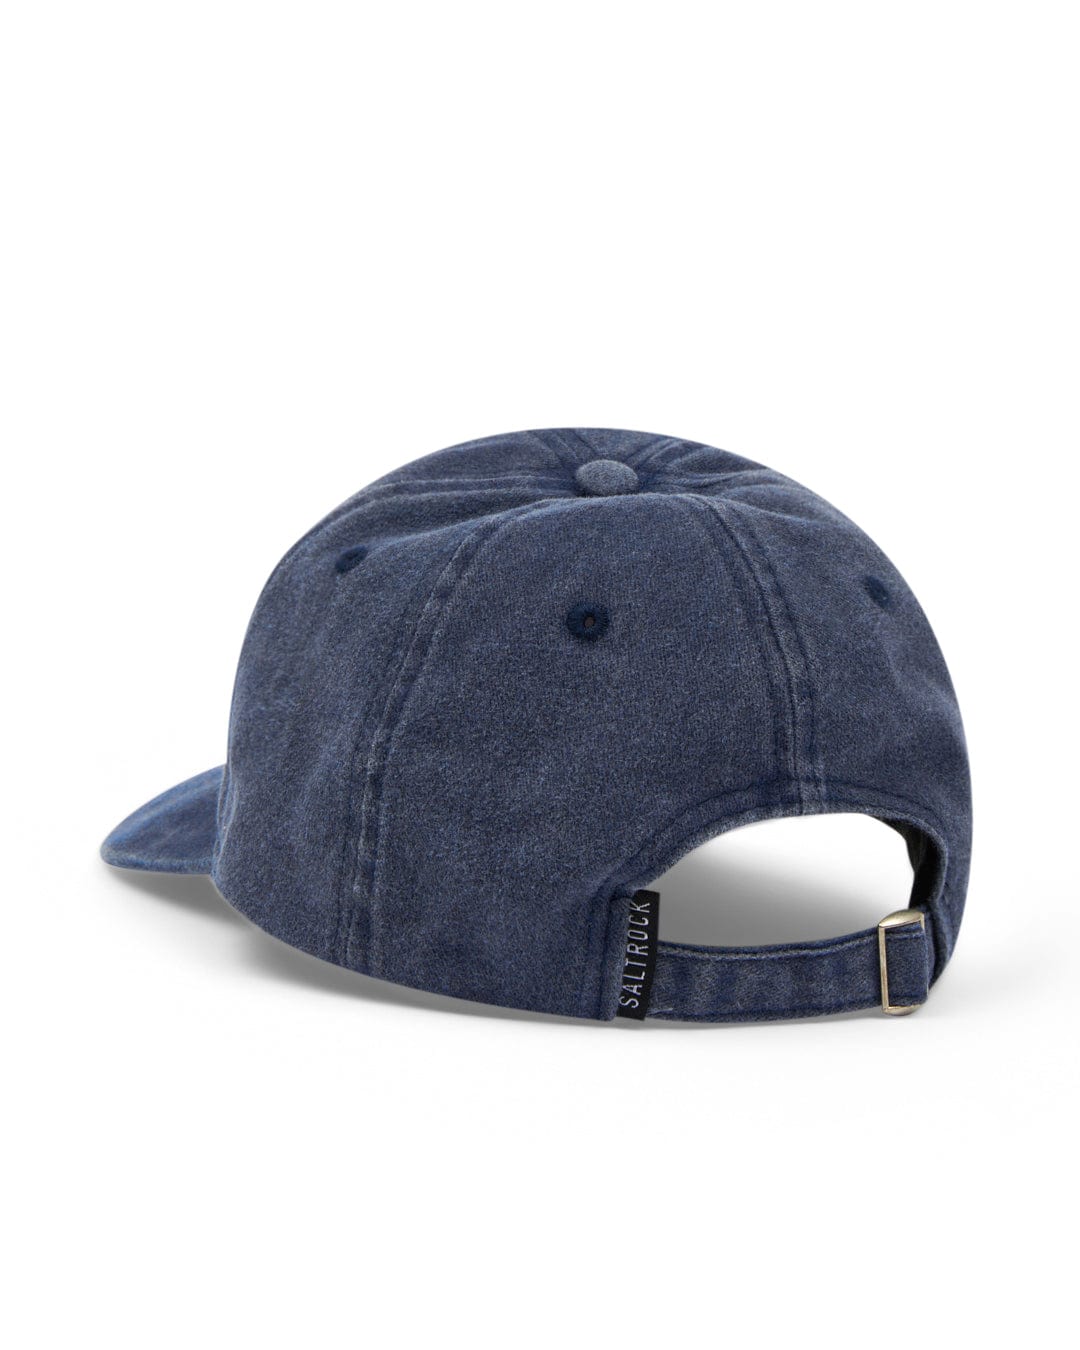 Saltrock's Palm Cap in Dark Blue with an adjustable strap, displayed against a white background.